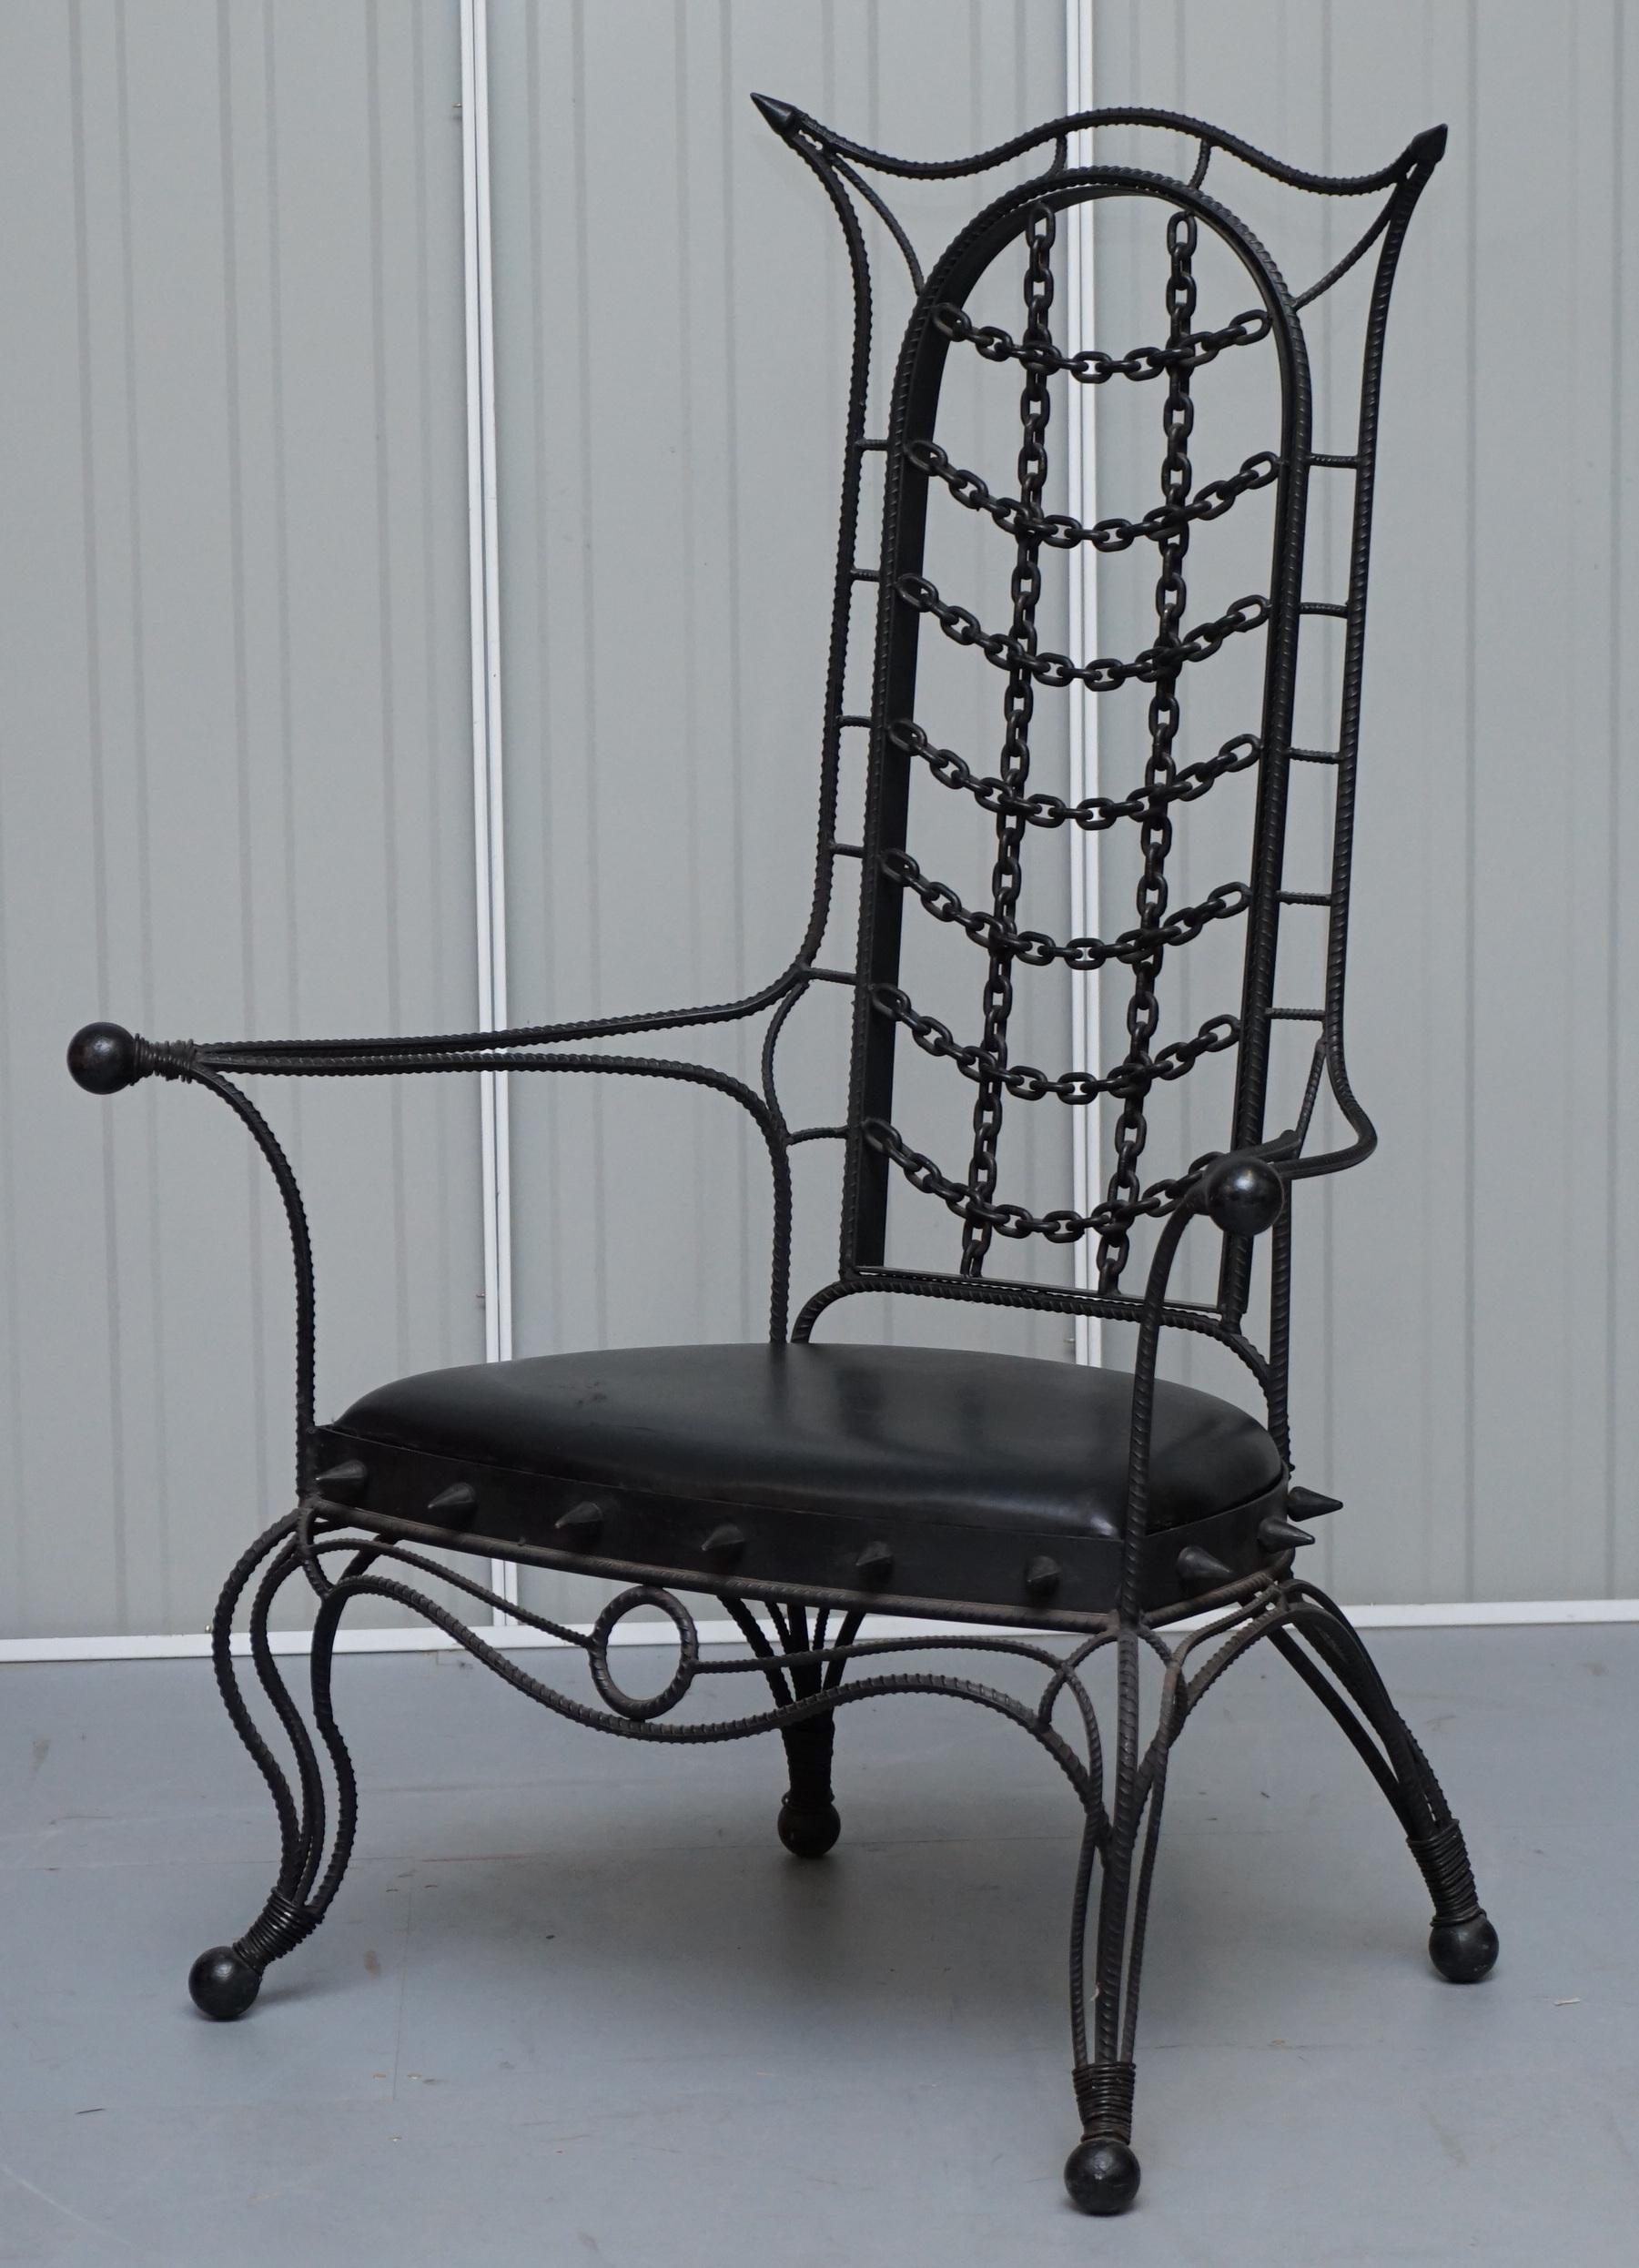 Gothique Interesting Iron Workers Gothic Sexy Dungeon Iron Throne Armchair Part Suite en vente